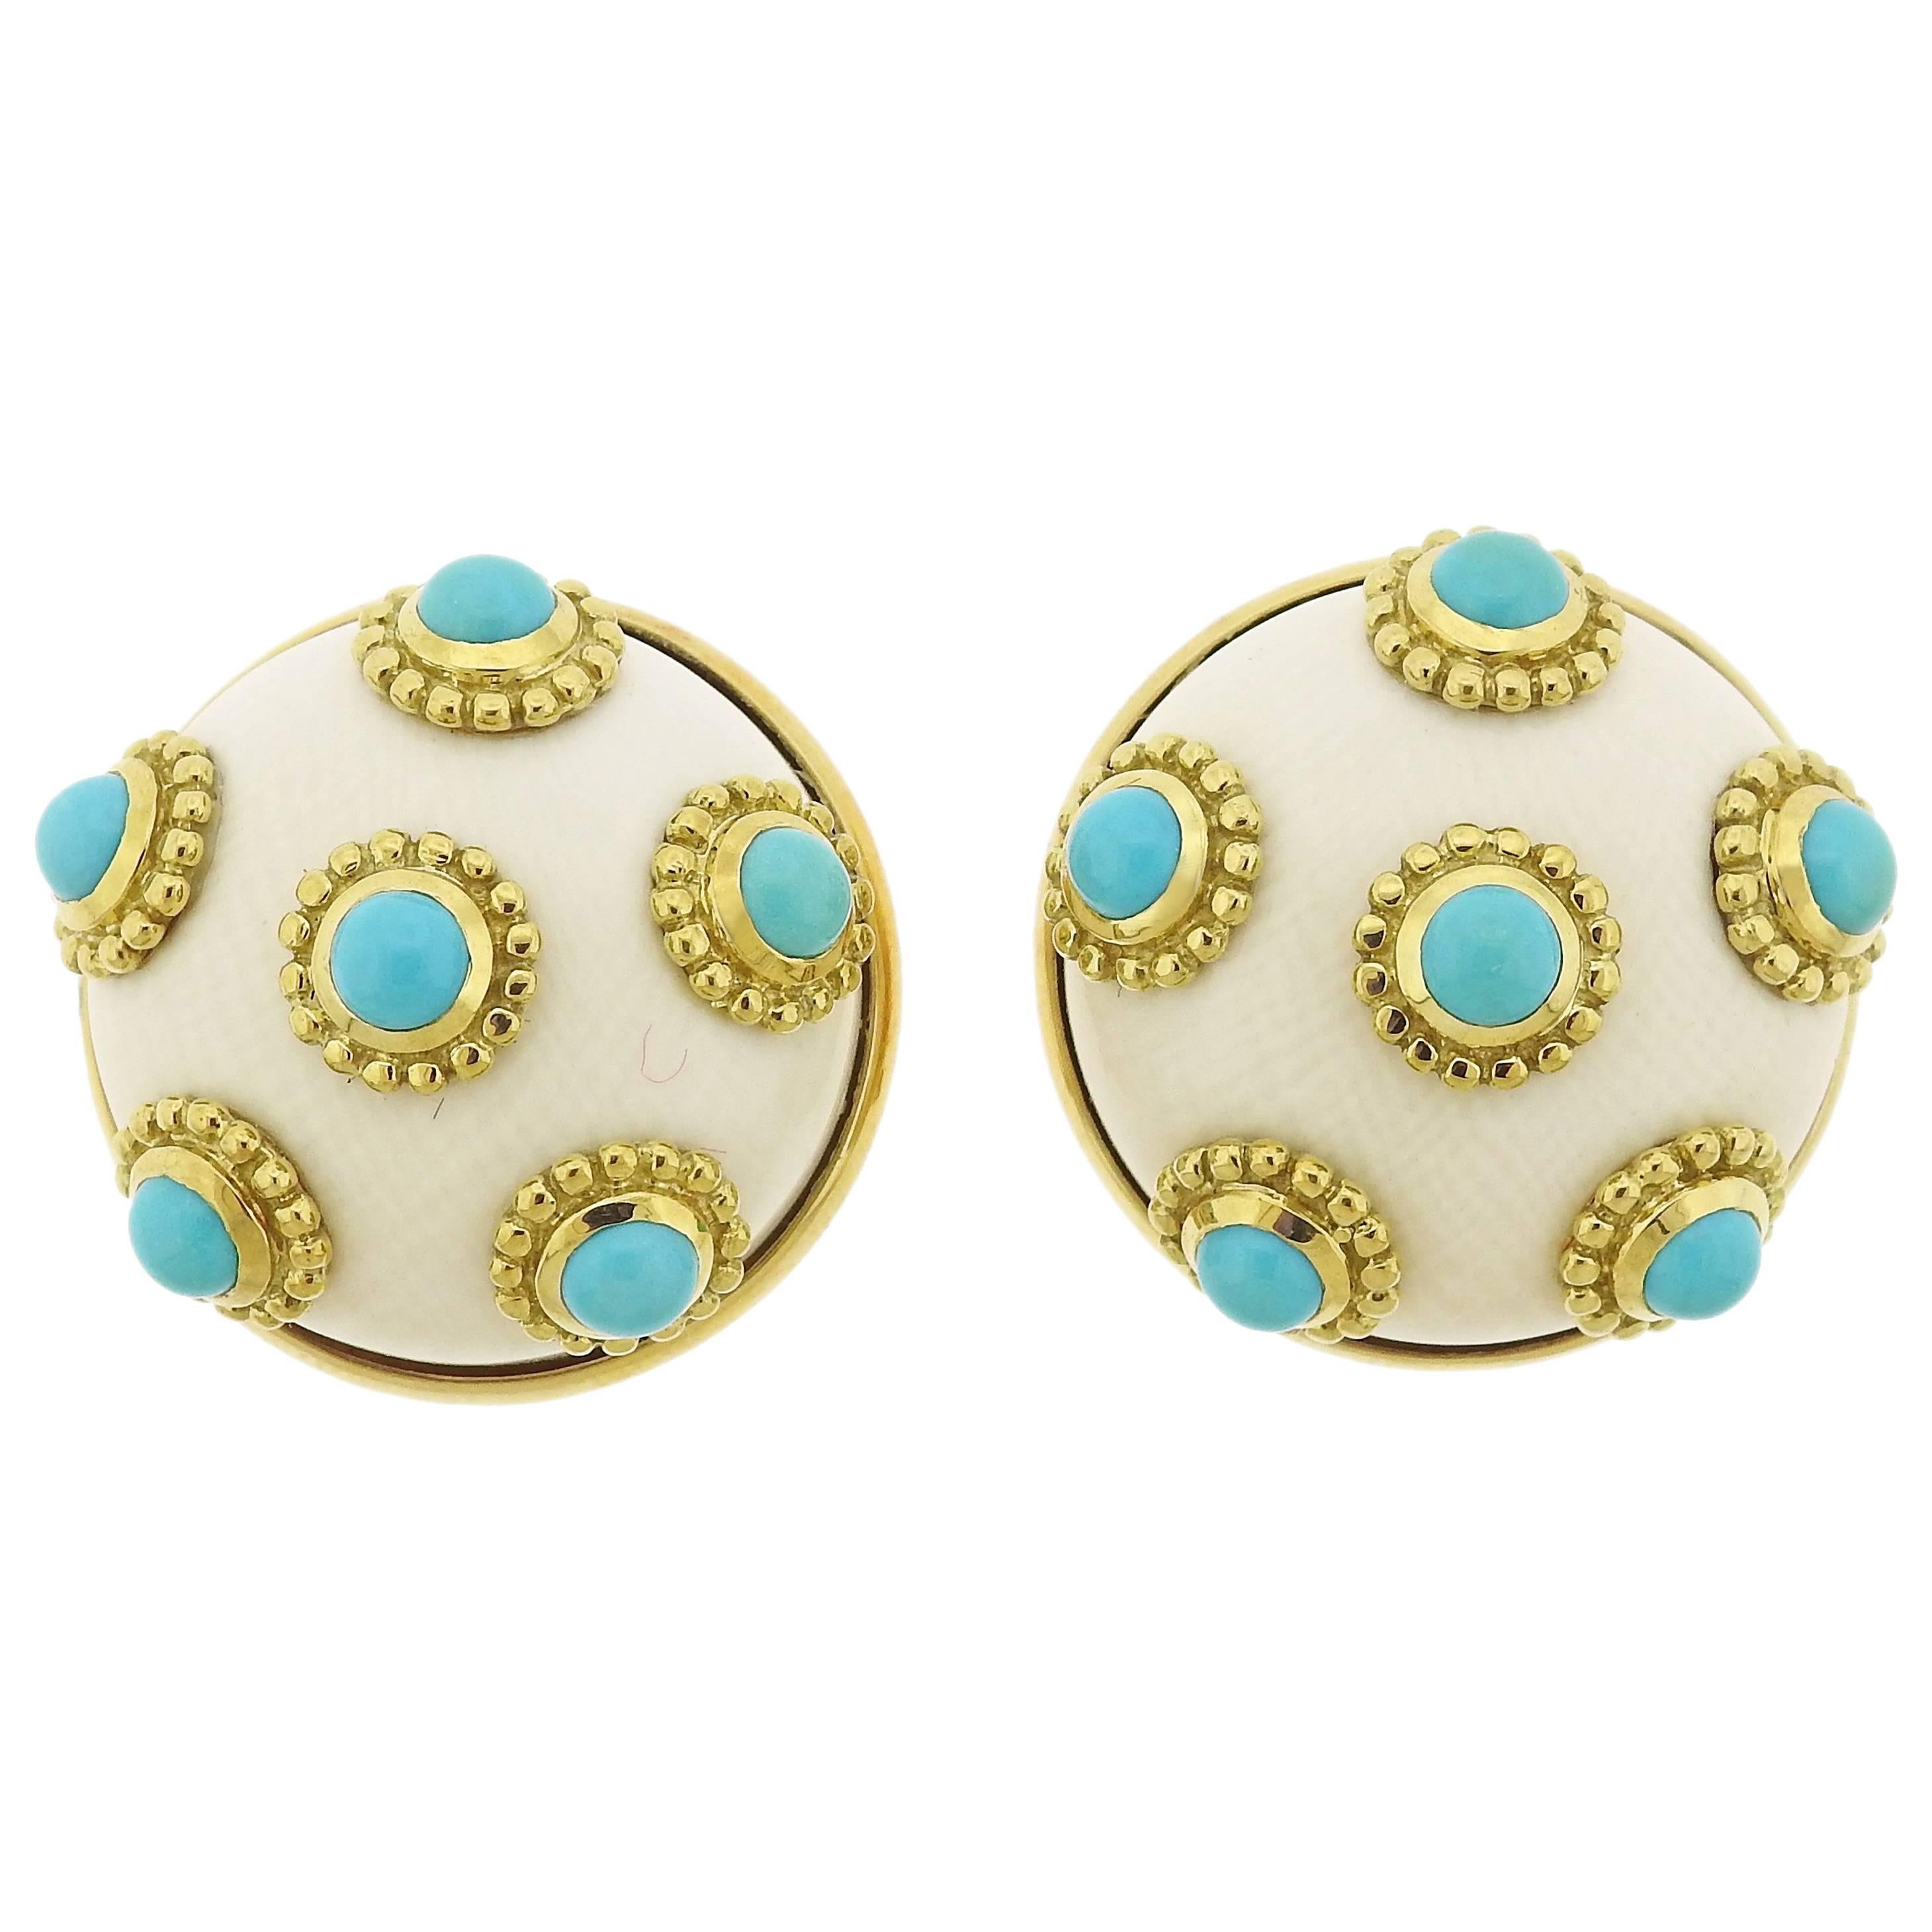 Adria de Haume Turquoise Hardstone Gold Button Earrings